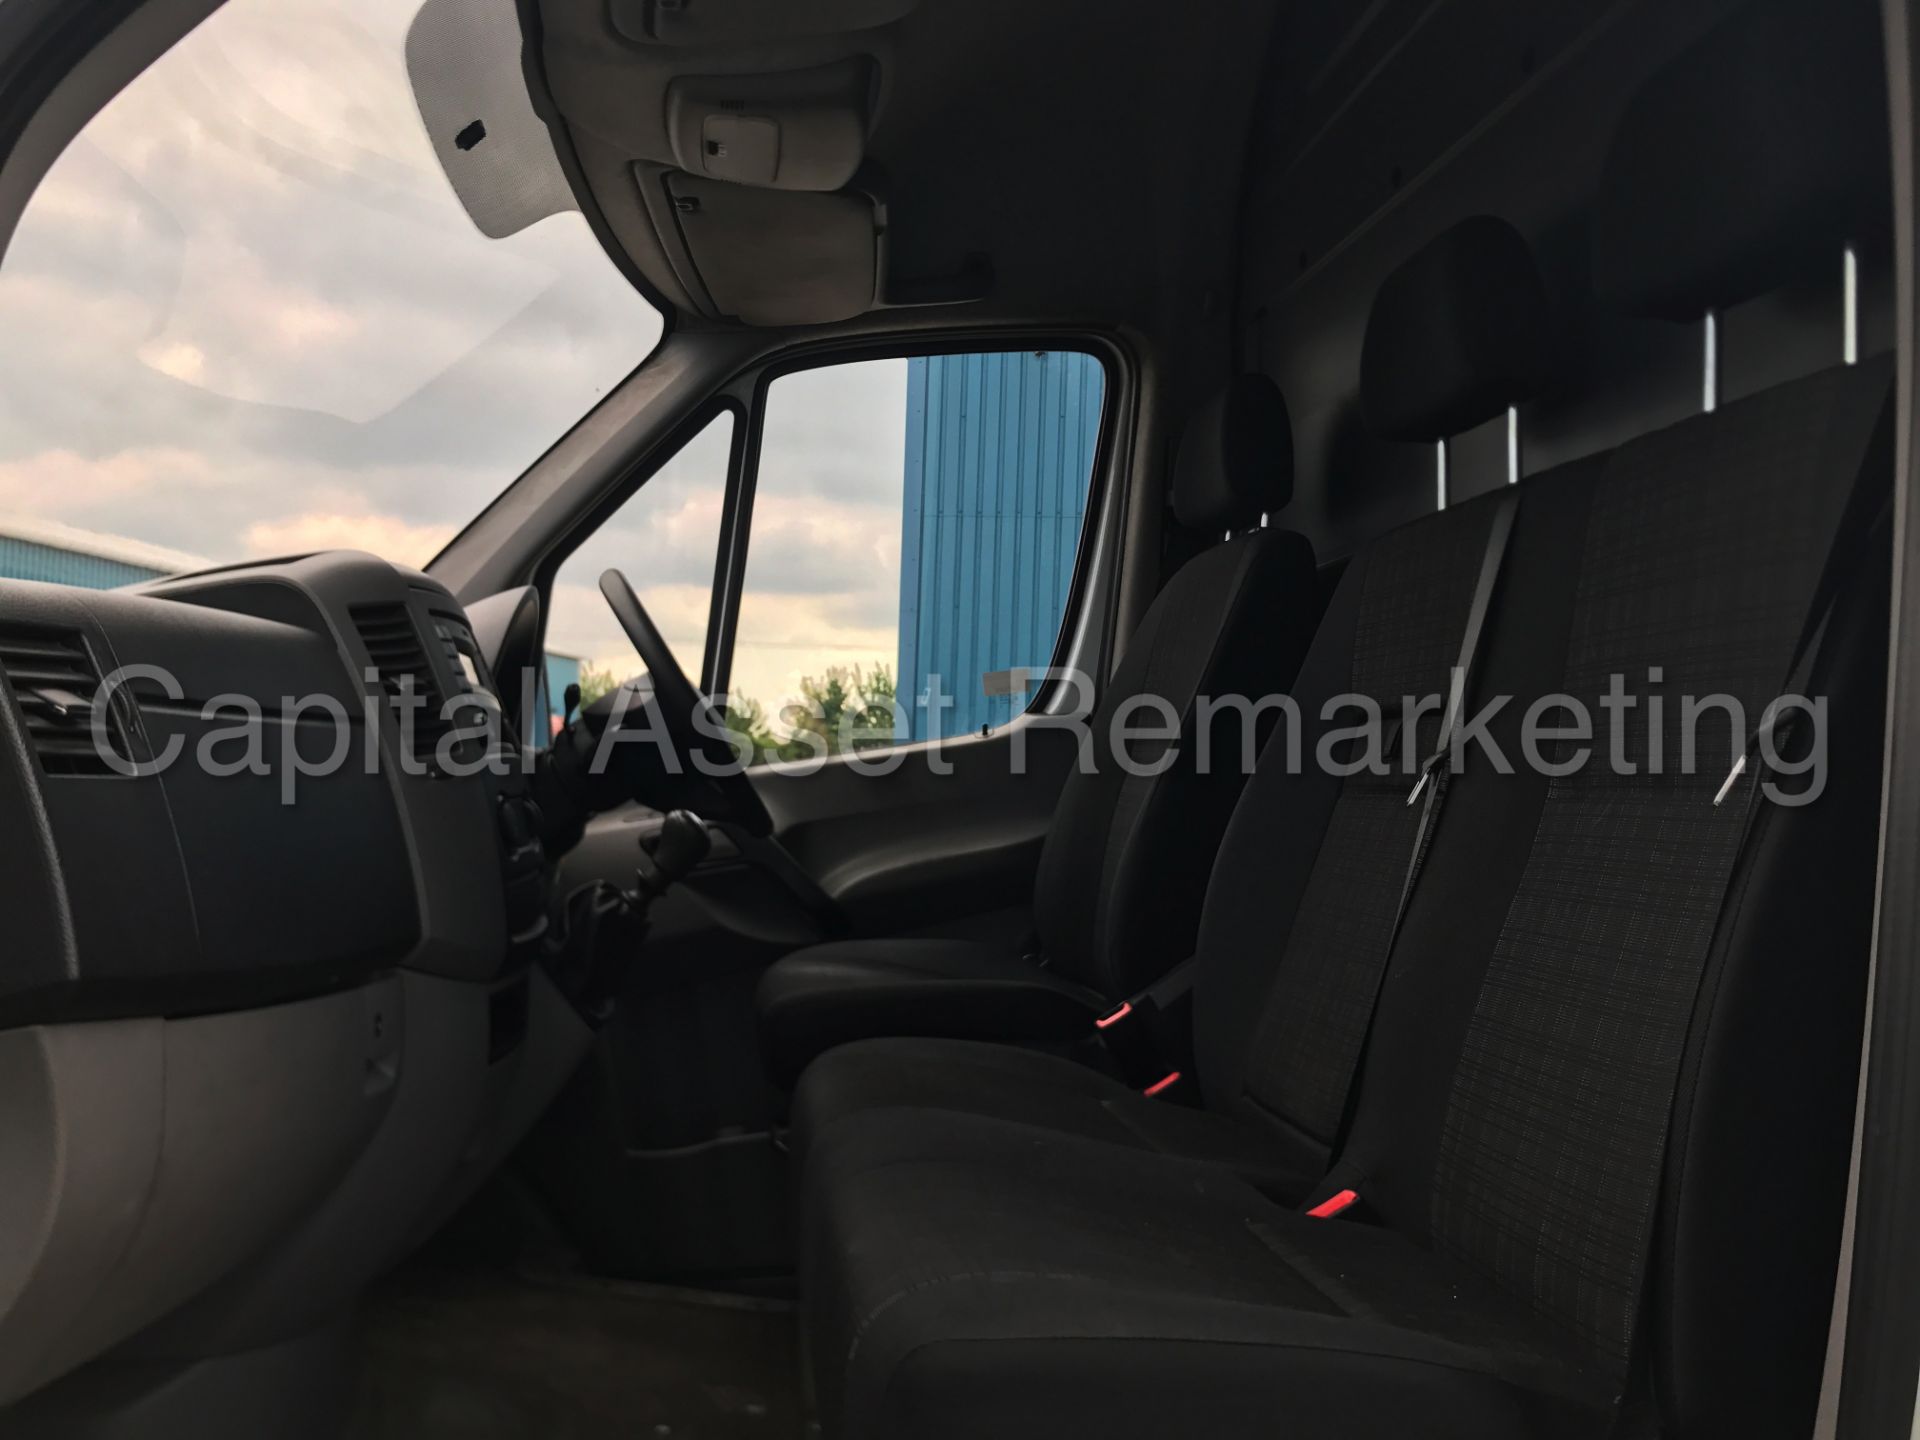 MERCEDES-BENZ SPRINTER 313 CDI 'MWB HI-ROOF' (2014) '130 BHP - 6 SPEED' (1 COMPANY OWNER FROM NEW) - Image 13 of 22